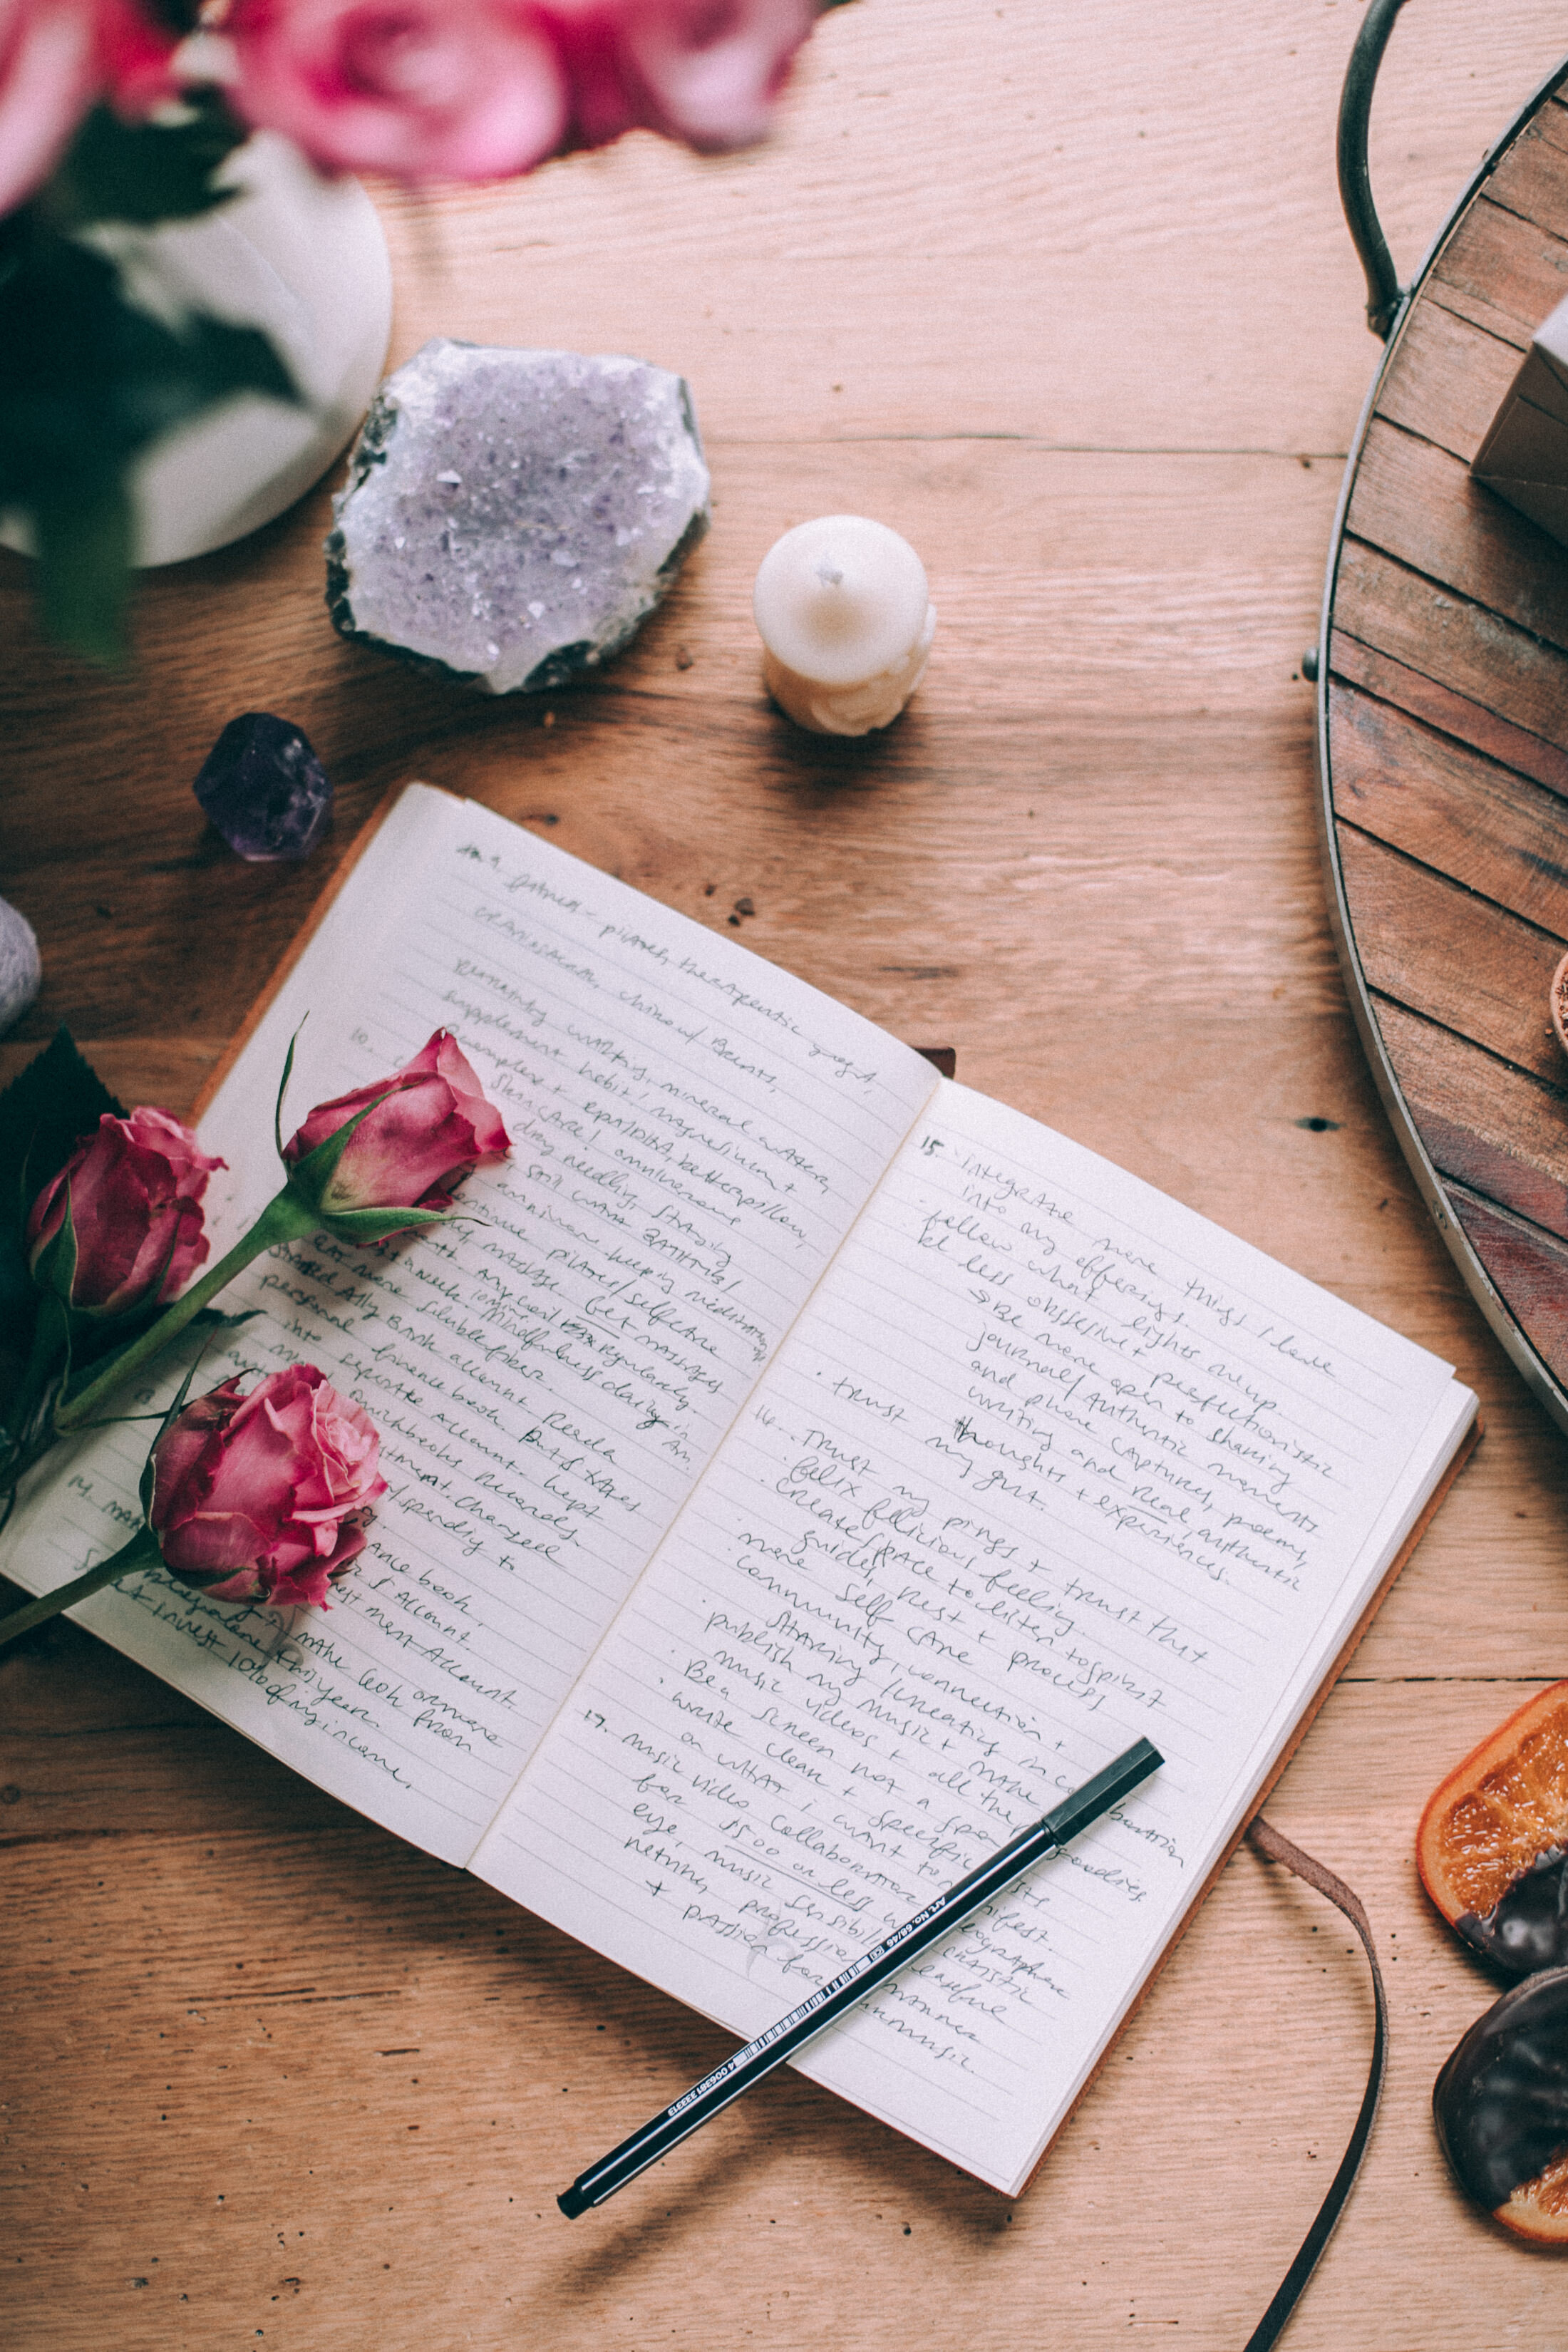 17 Journal Prompts To Support You On Your Wellness Journey